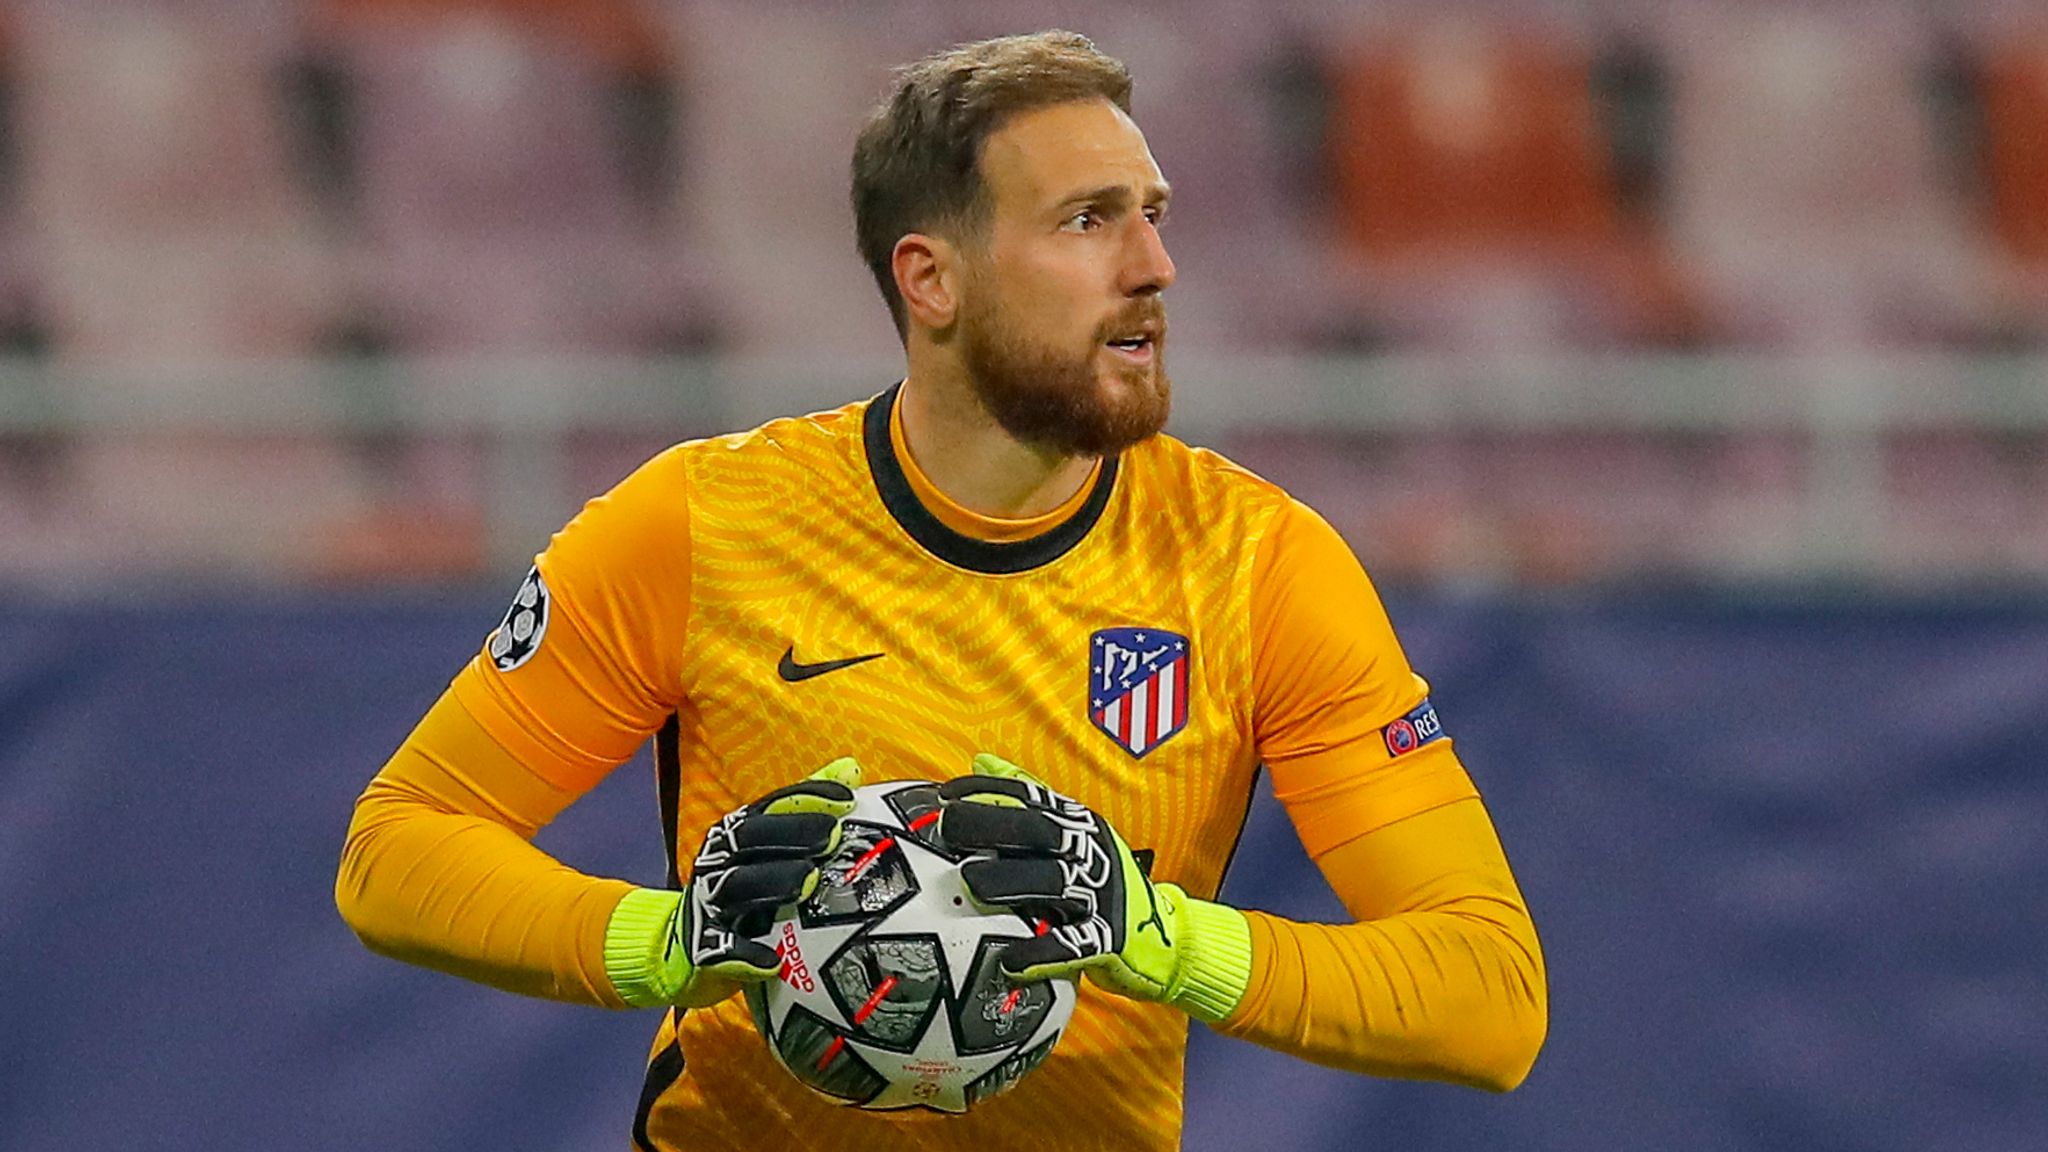 Jan Oblak under consideration as Manchester United look to enter goalkeeper market this summer | Football News | Sky Sports